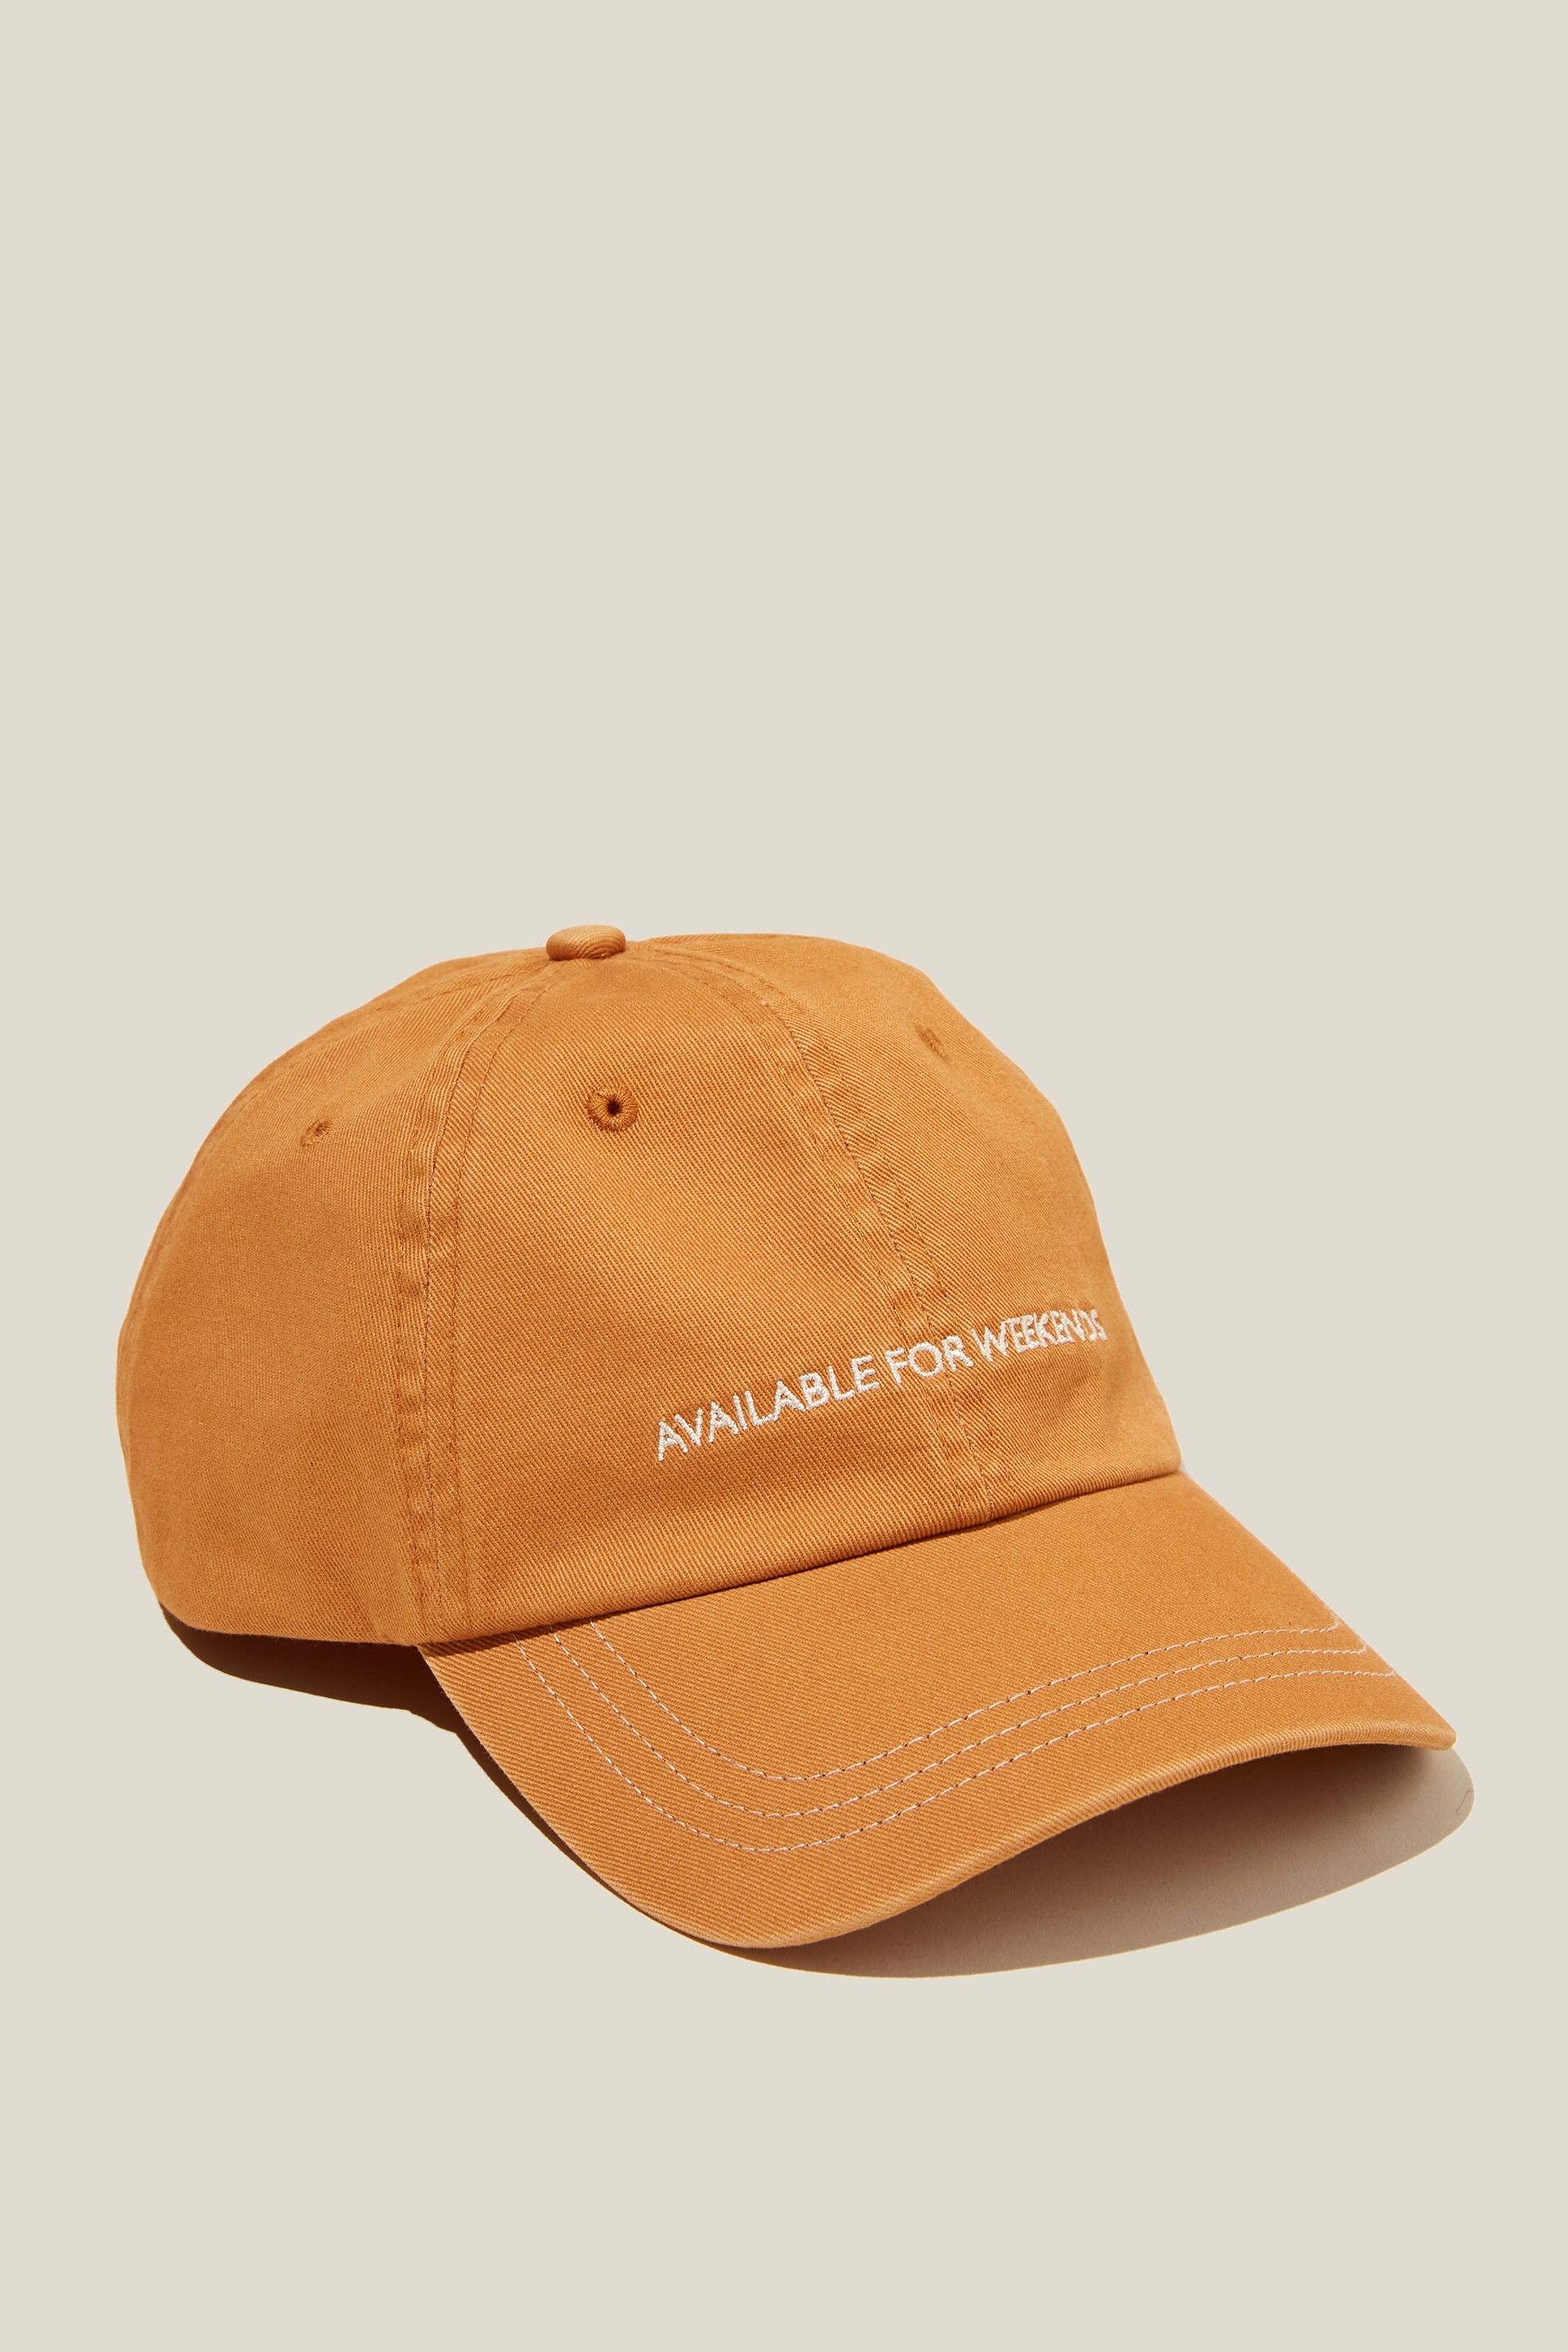 Rubi - Classic Dad Cap - Available for weekends/tan